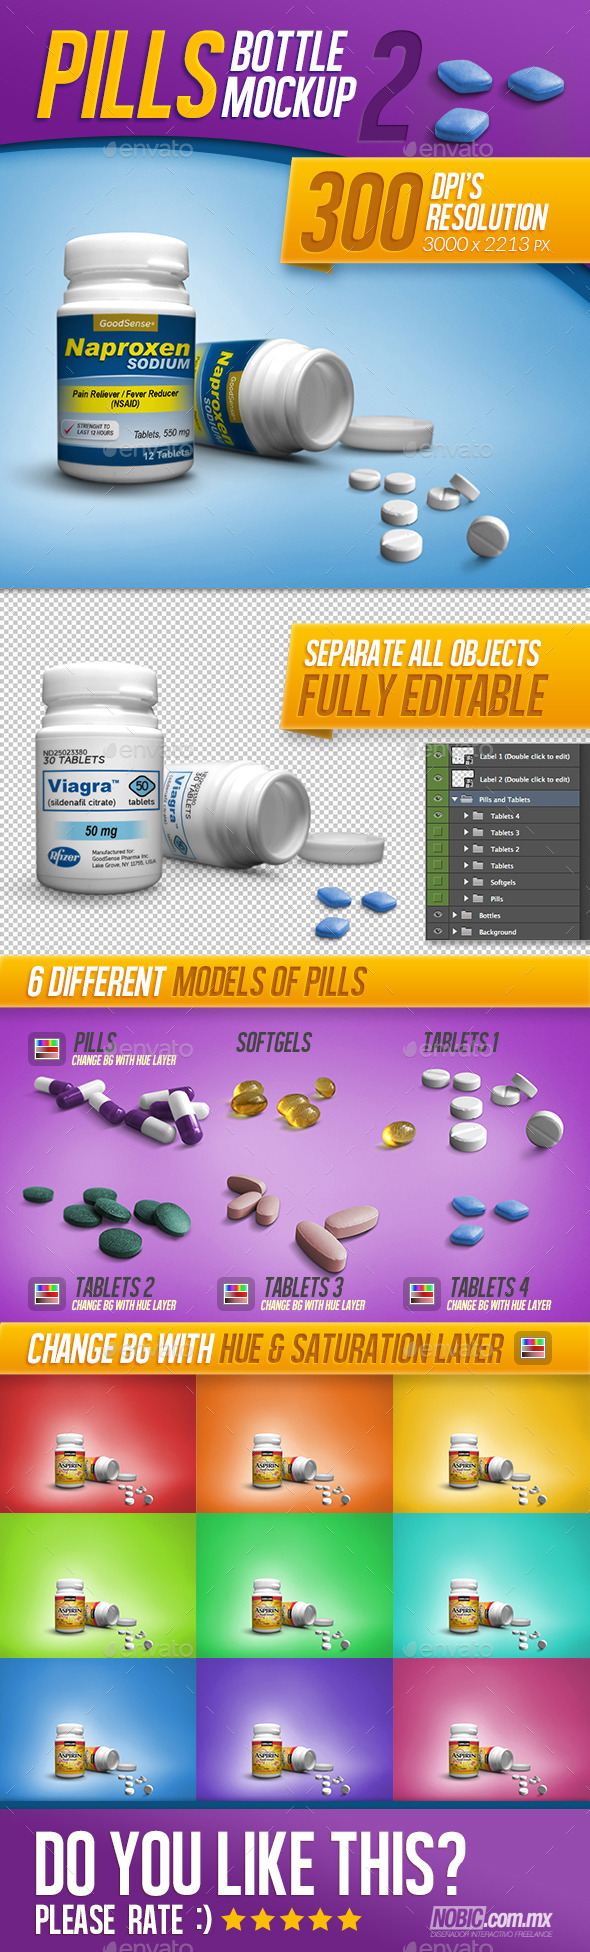 Vitamin Bottle Label Template from previews.customer.envatousercontent.com